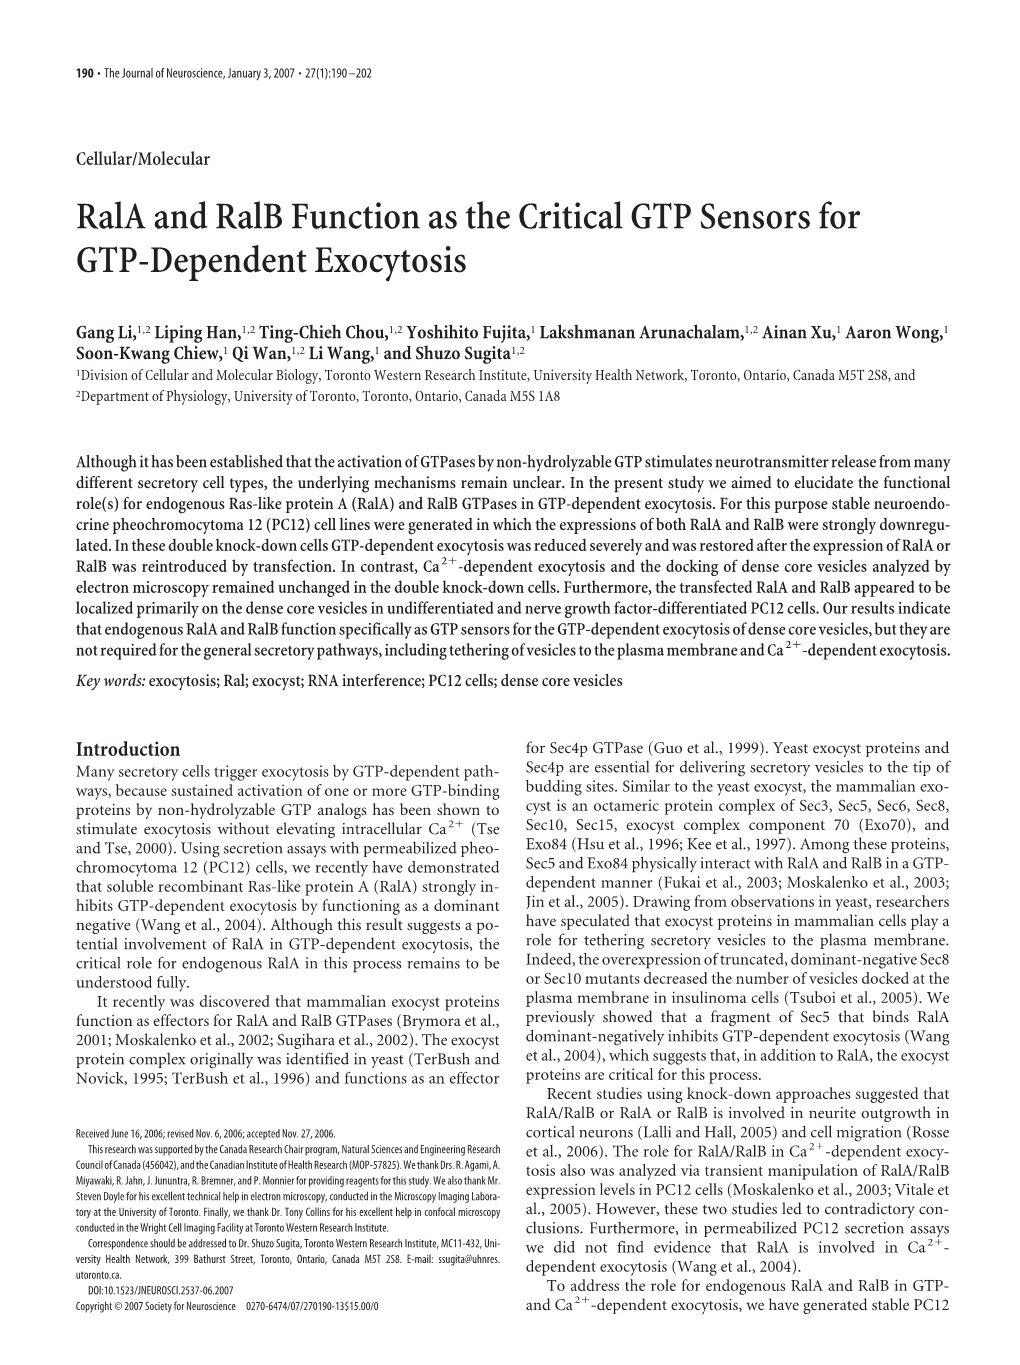 Rala and Ralb Function As the Critical GTP Sensors for GTP-Dependent Exocytosis